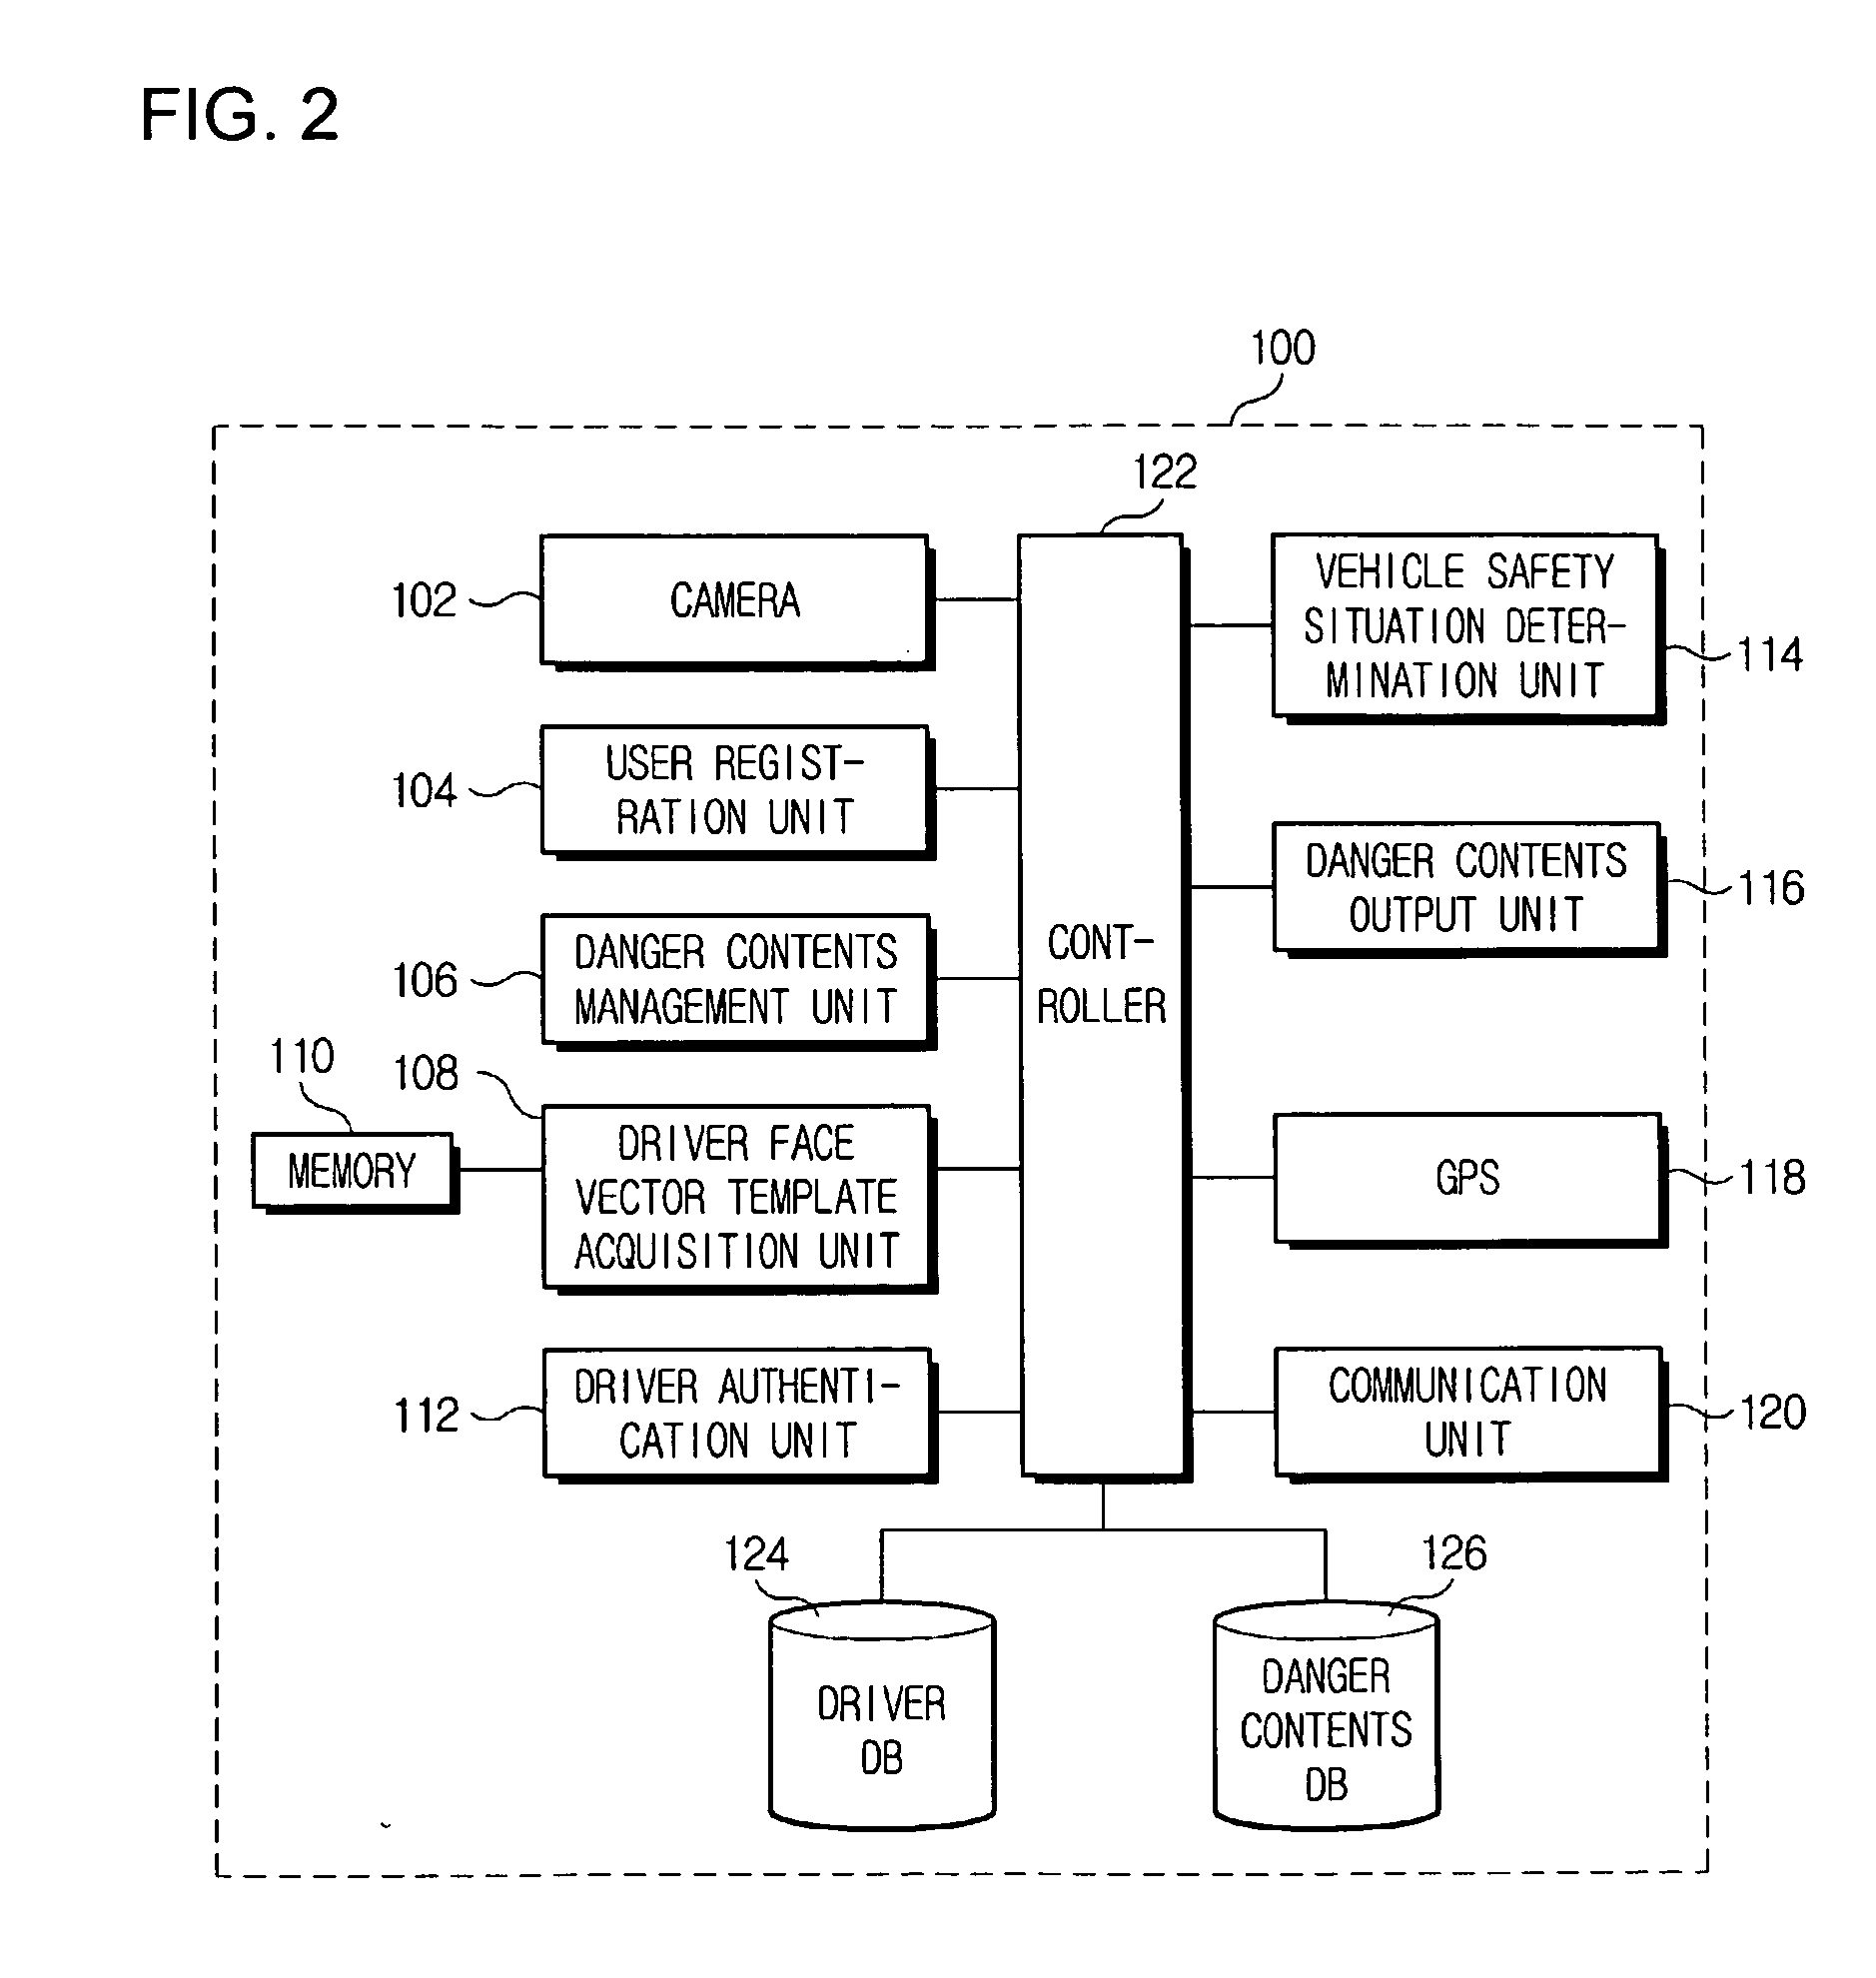 Vehicle emergency preventive terminal device and internet system using facial recognition technology